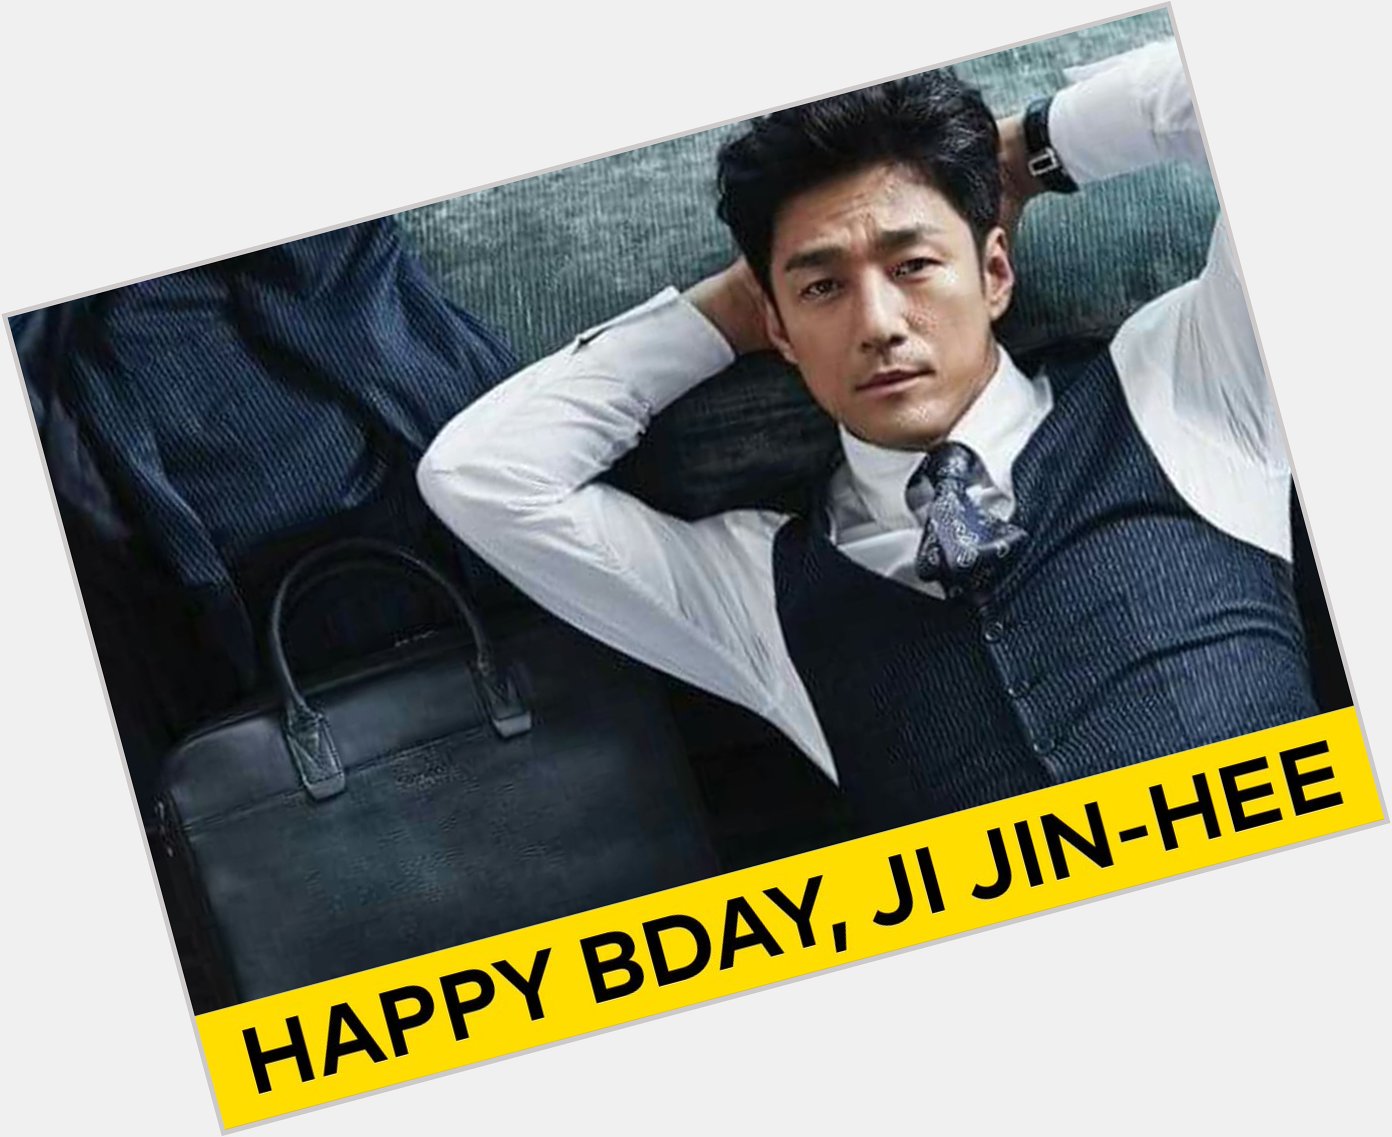 6/24 Happy birthday to Ji Jin-hee! You\re the REAL jewel in the palace 